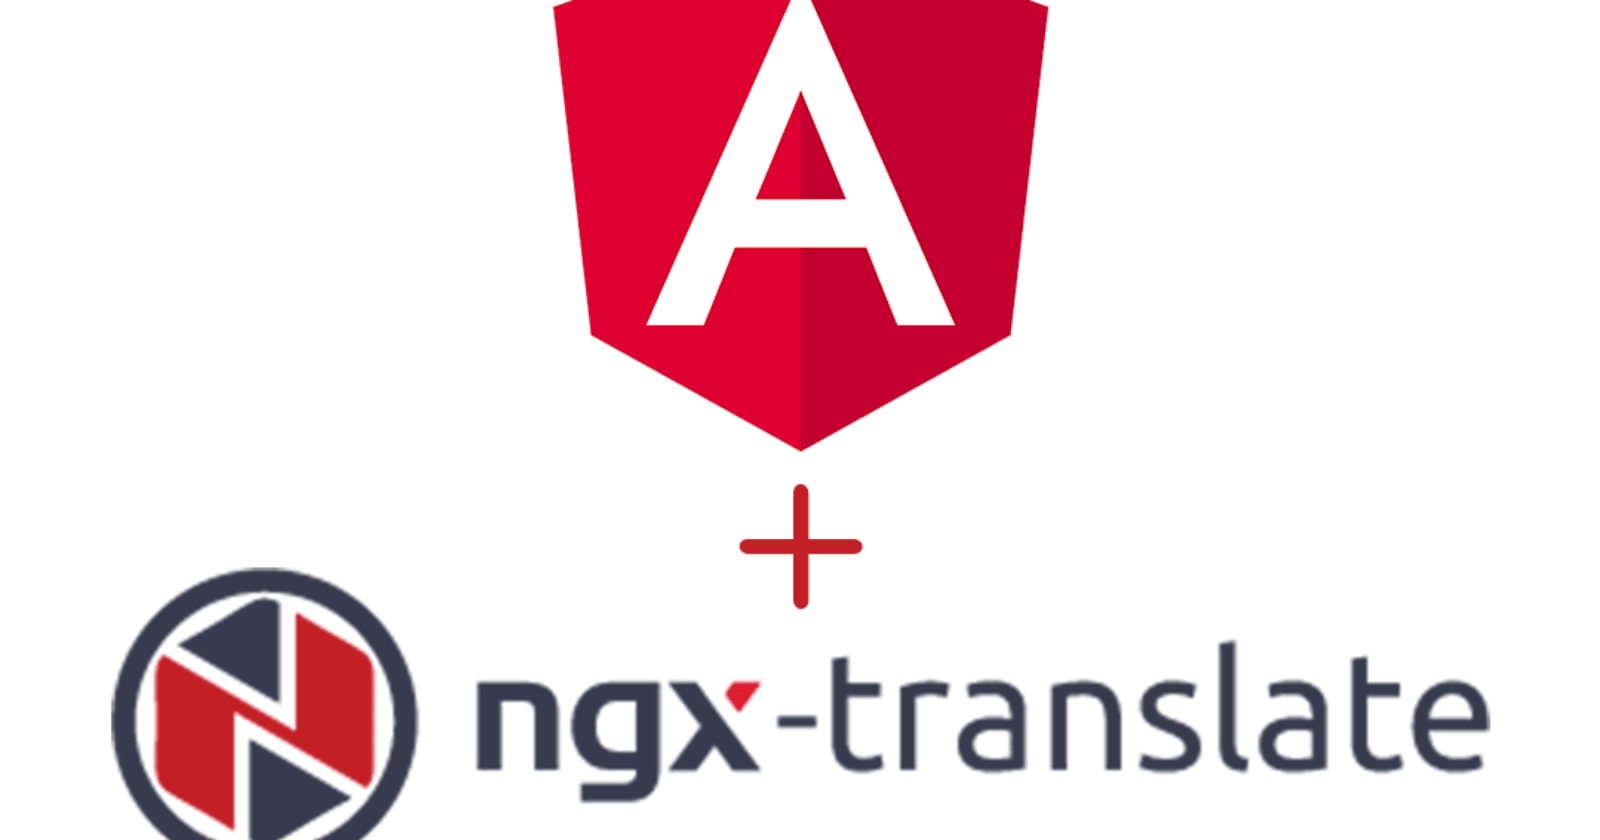 Getting Started with ngx-translate: Installation and Usage